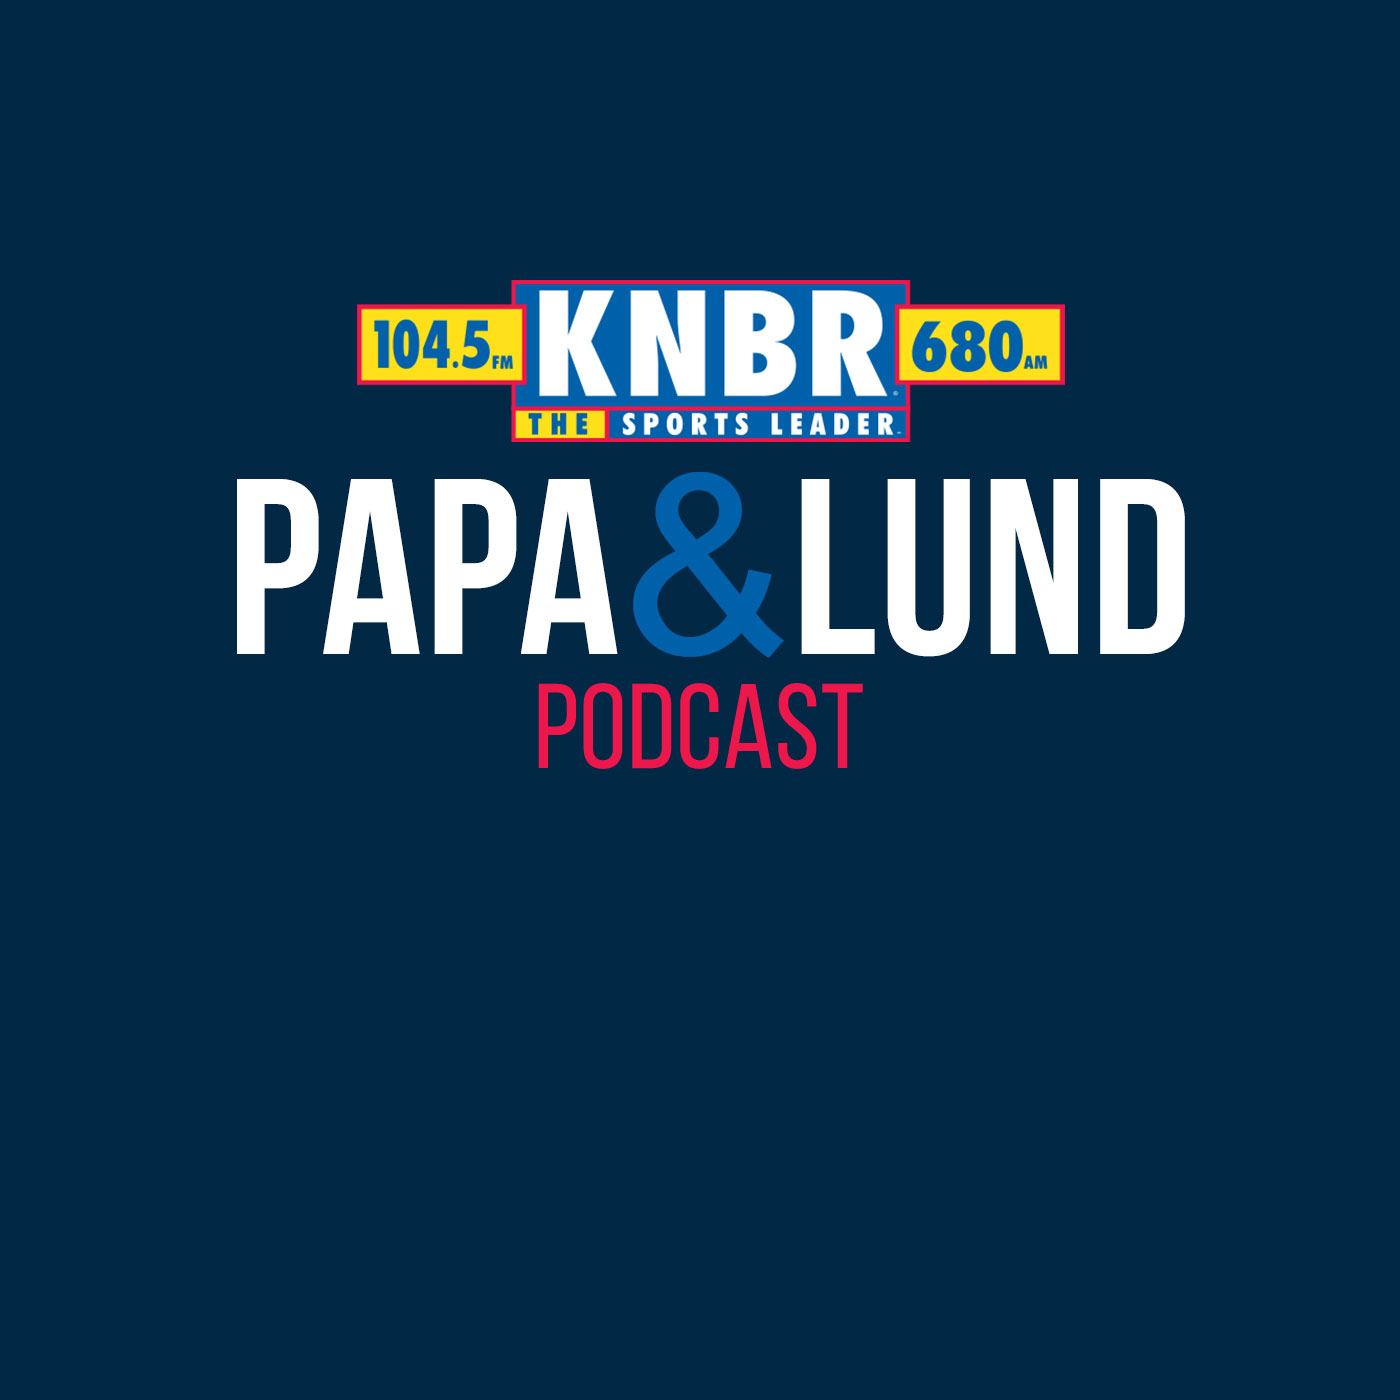 8-4 Arik Armstead joins Papa & Lund LIVE from 49ers Training Camp to discuss how the addition of Javon Hargrave will elevate the 49ers defense to a new level